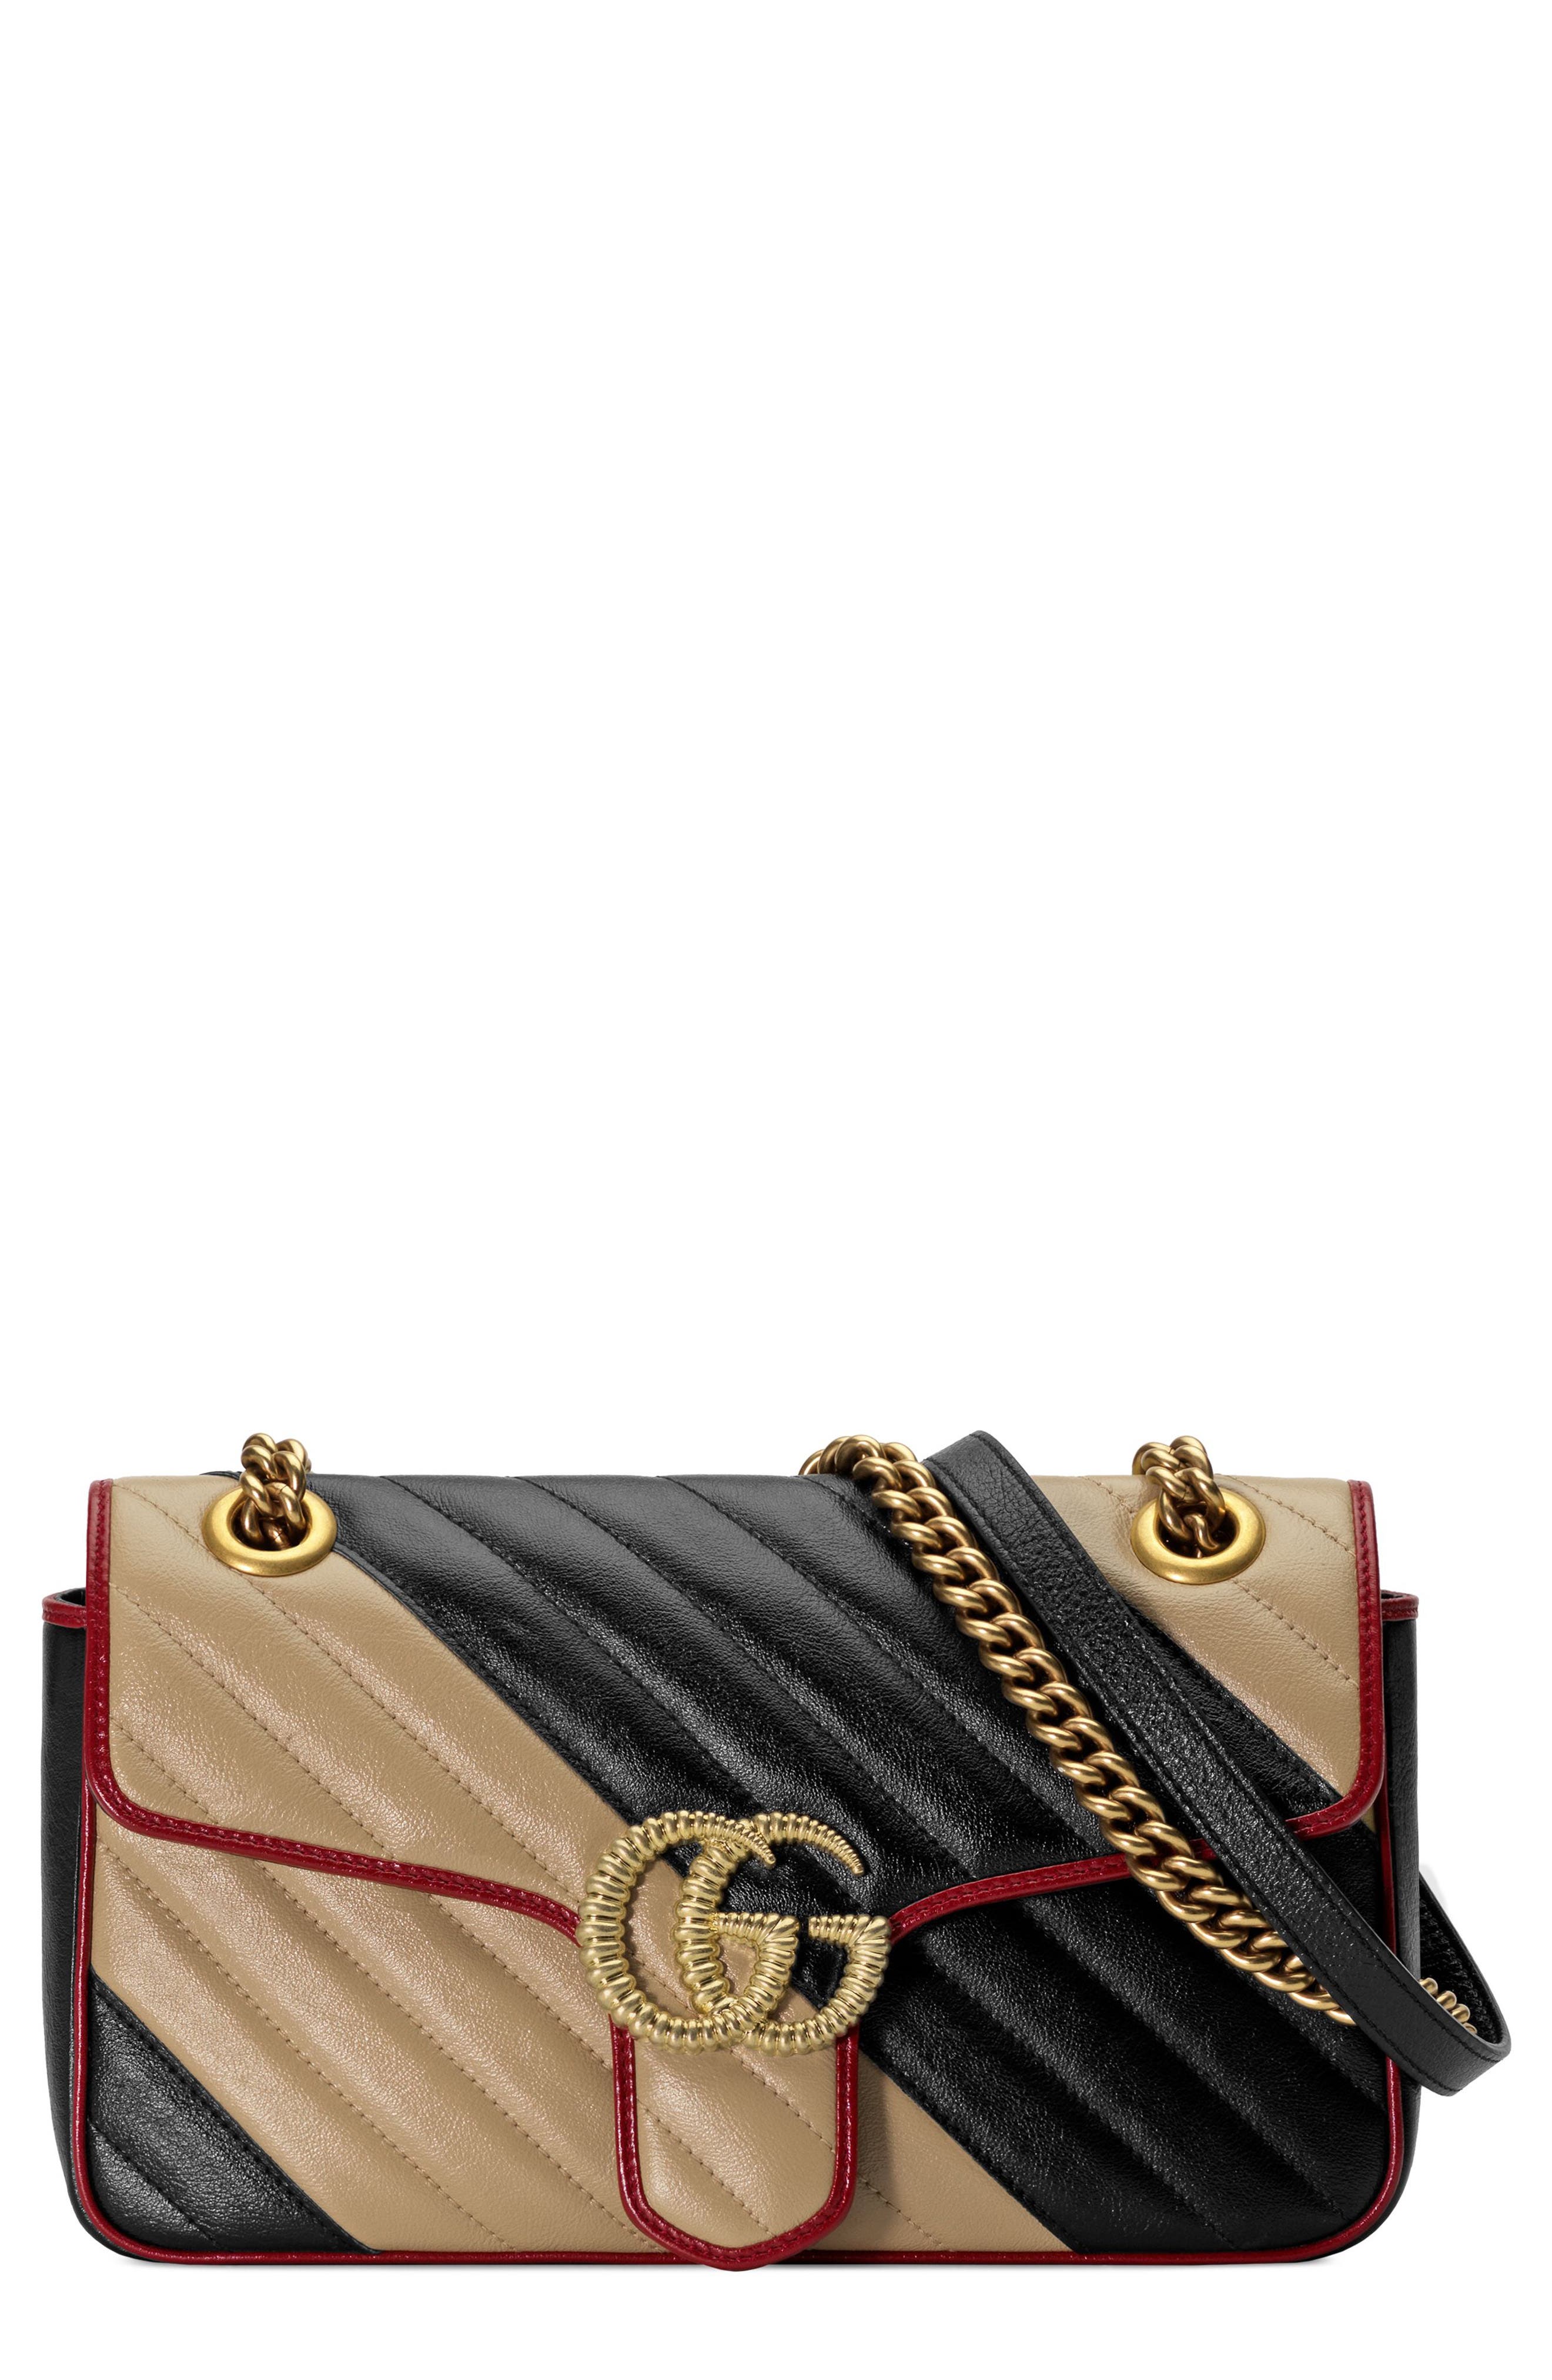 gucci marmont bag nordstrom